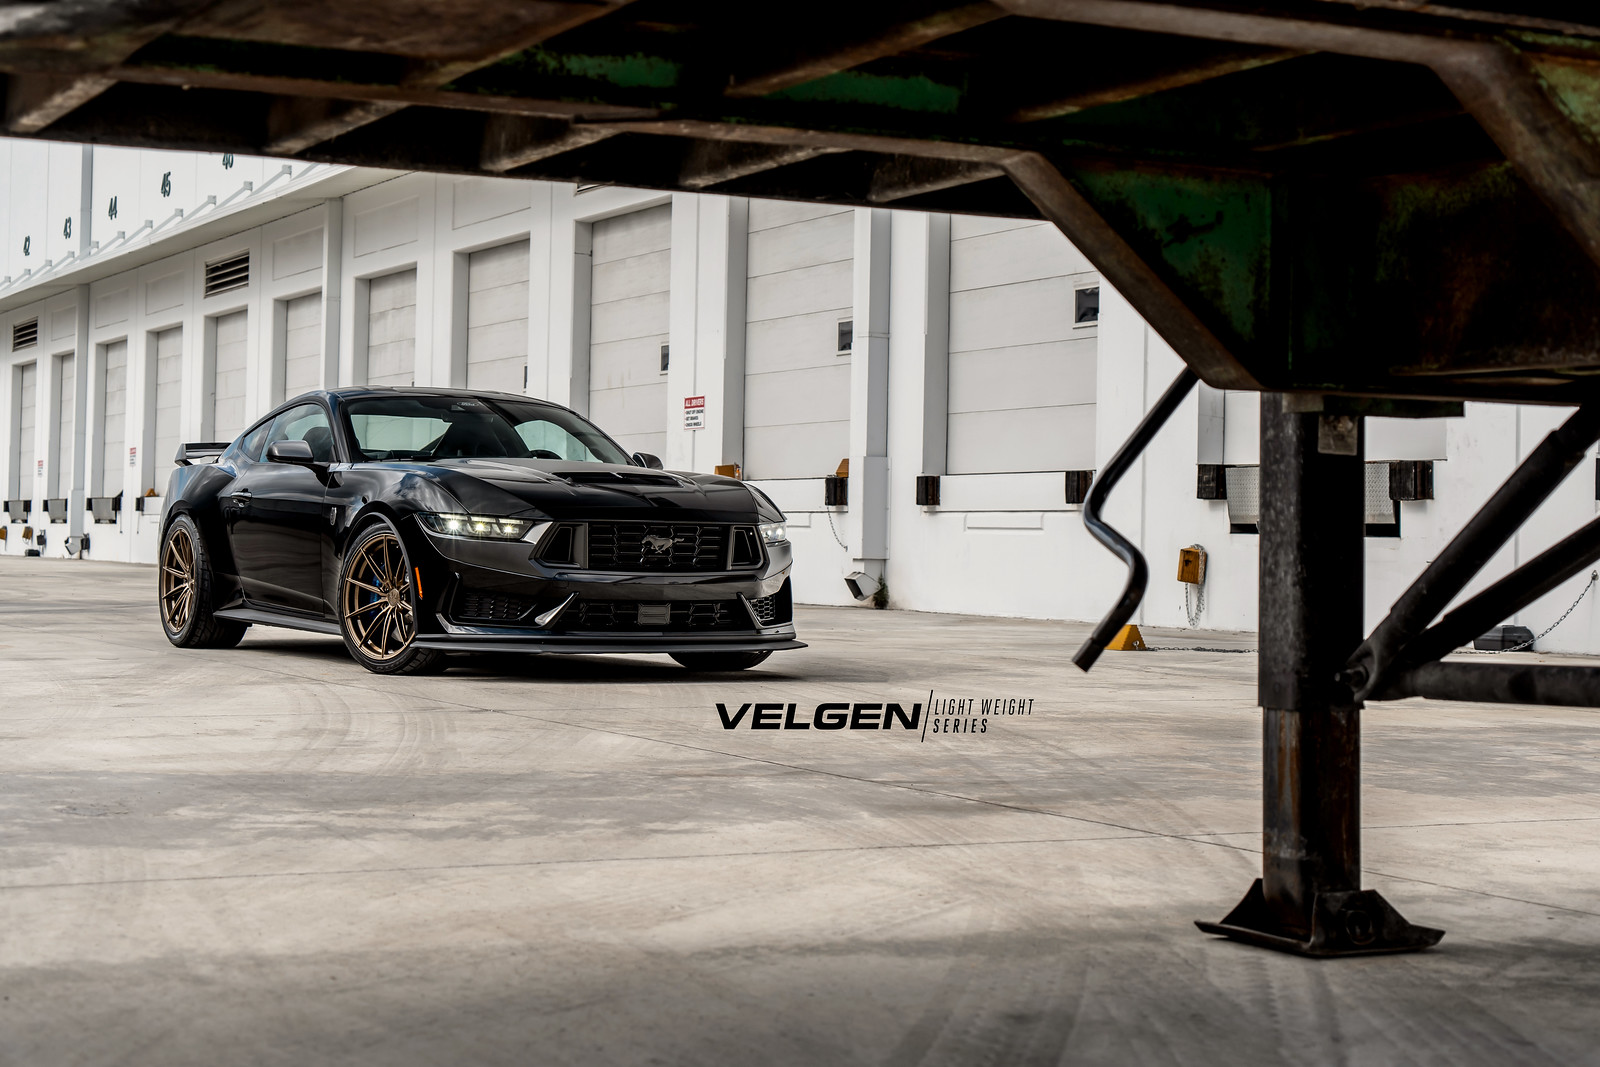 S650 Mustang Warning about HRE wheels and how they fit Darhorse Velgen VF10-2